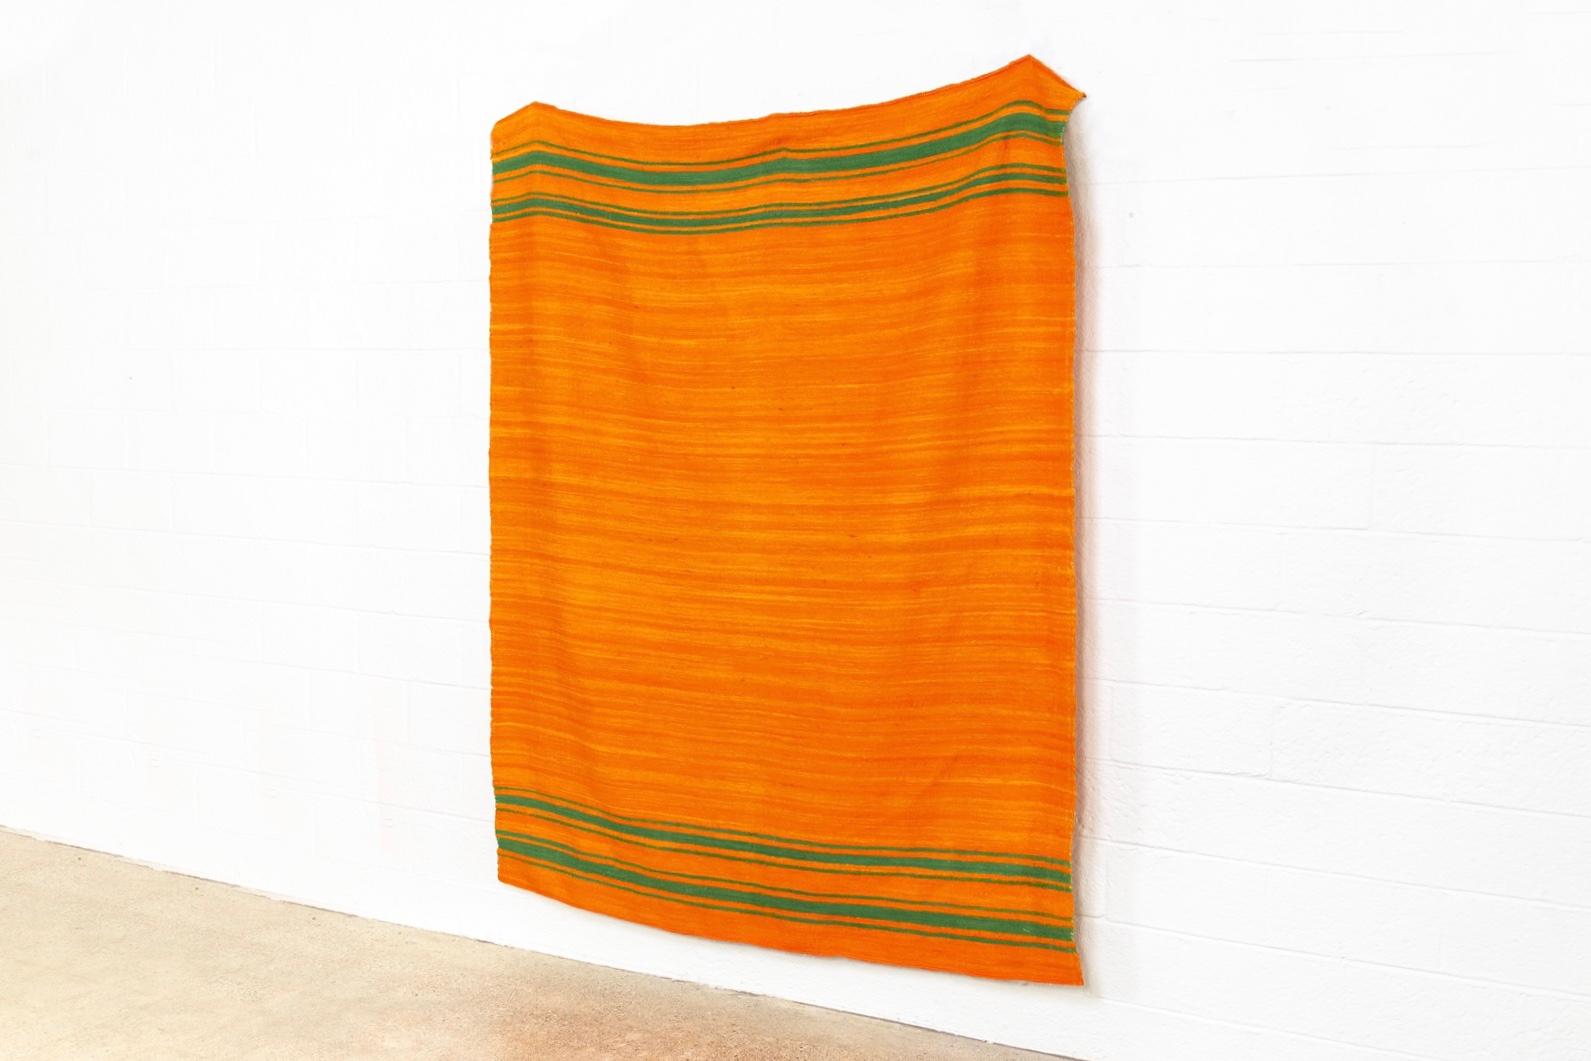 This vintage handwoven Moroccan Berber Kilim rug is handcrafted from hand-spun wool. It features a beautiful tangerine orange field with green stripes at both ends. The Minimalist design pairs well with a variety of decor styles including